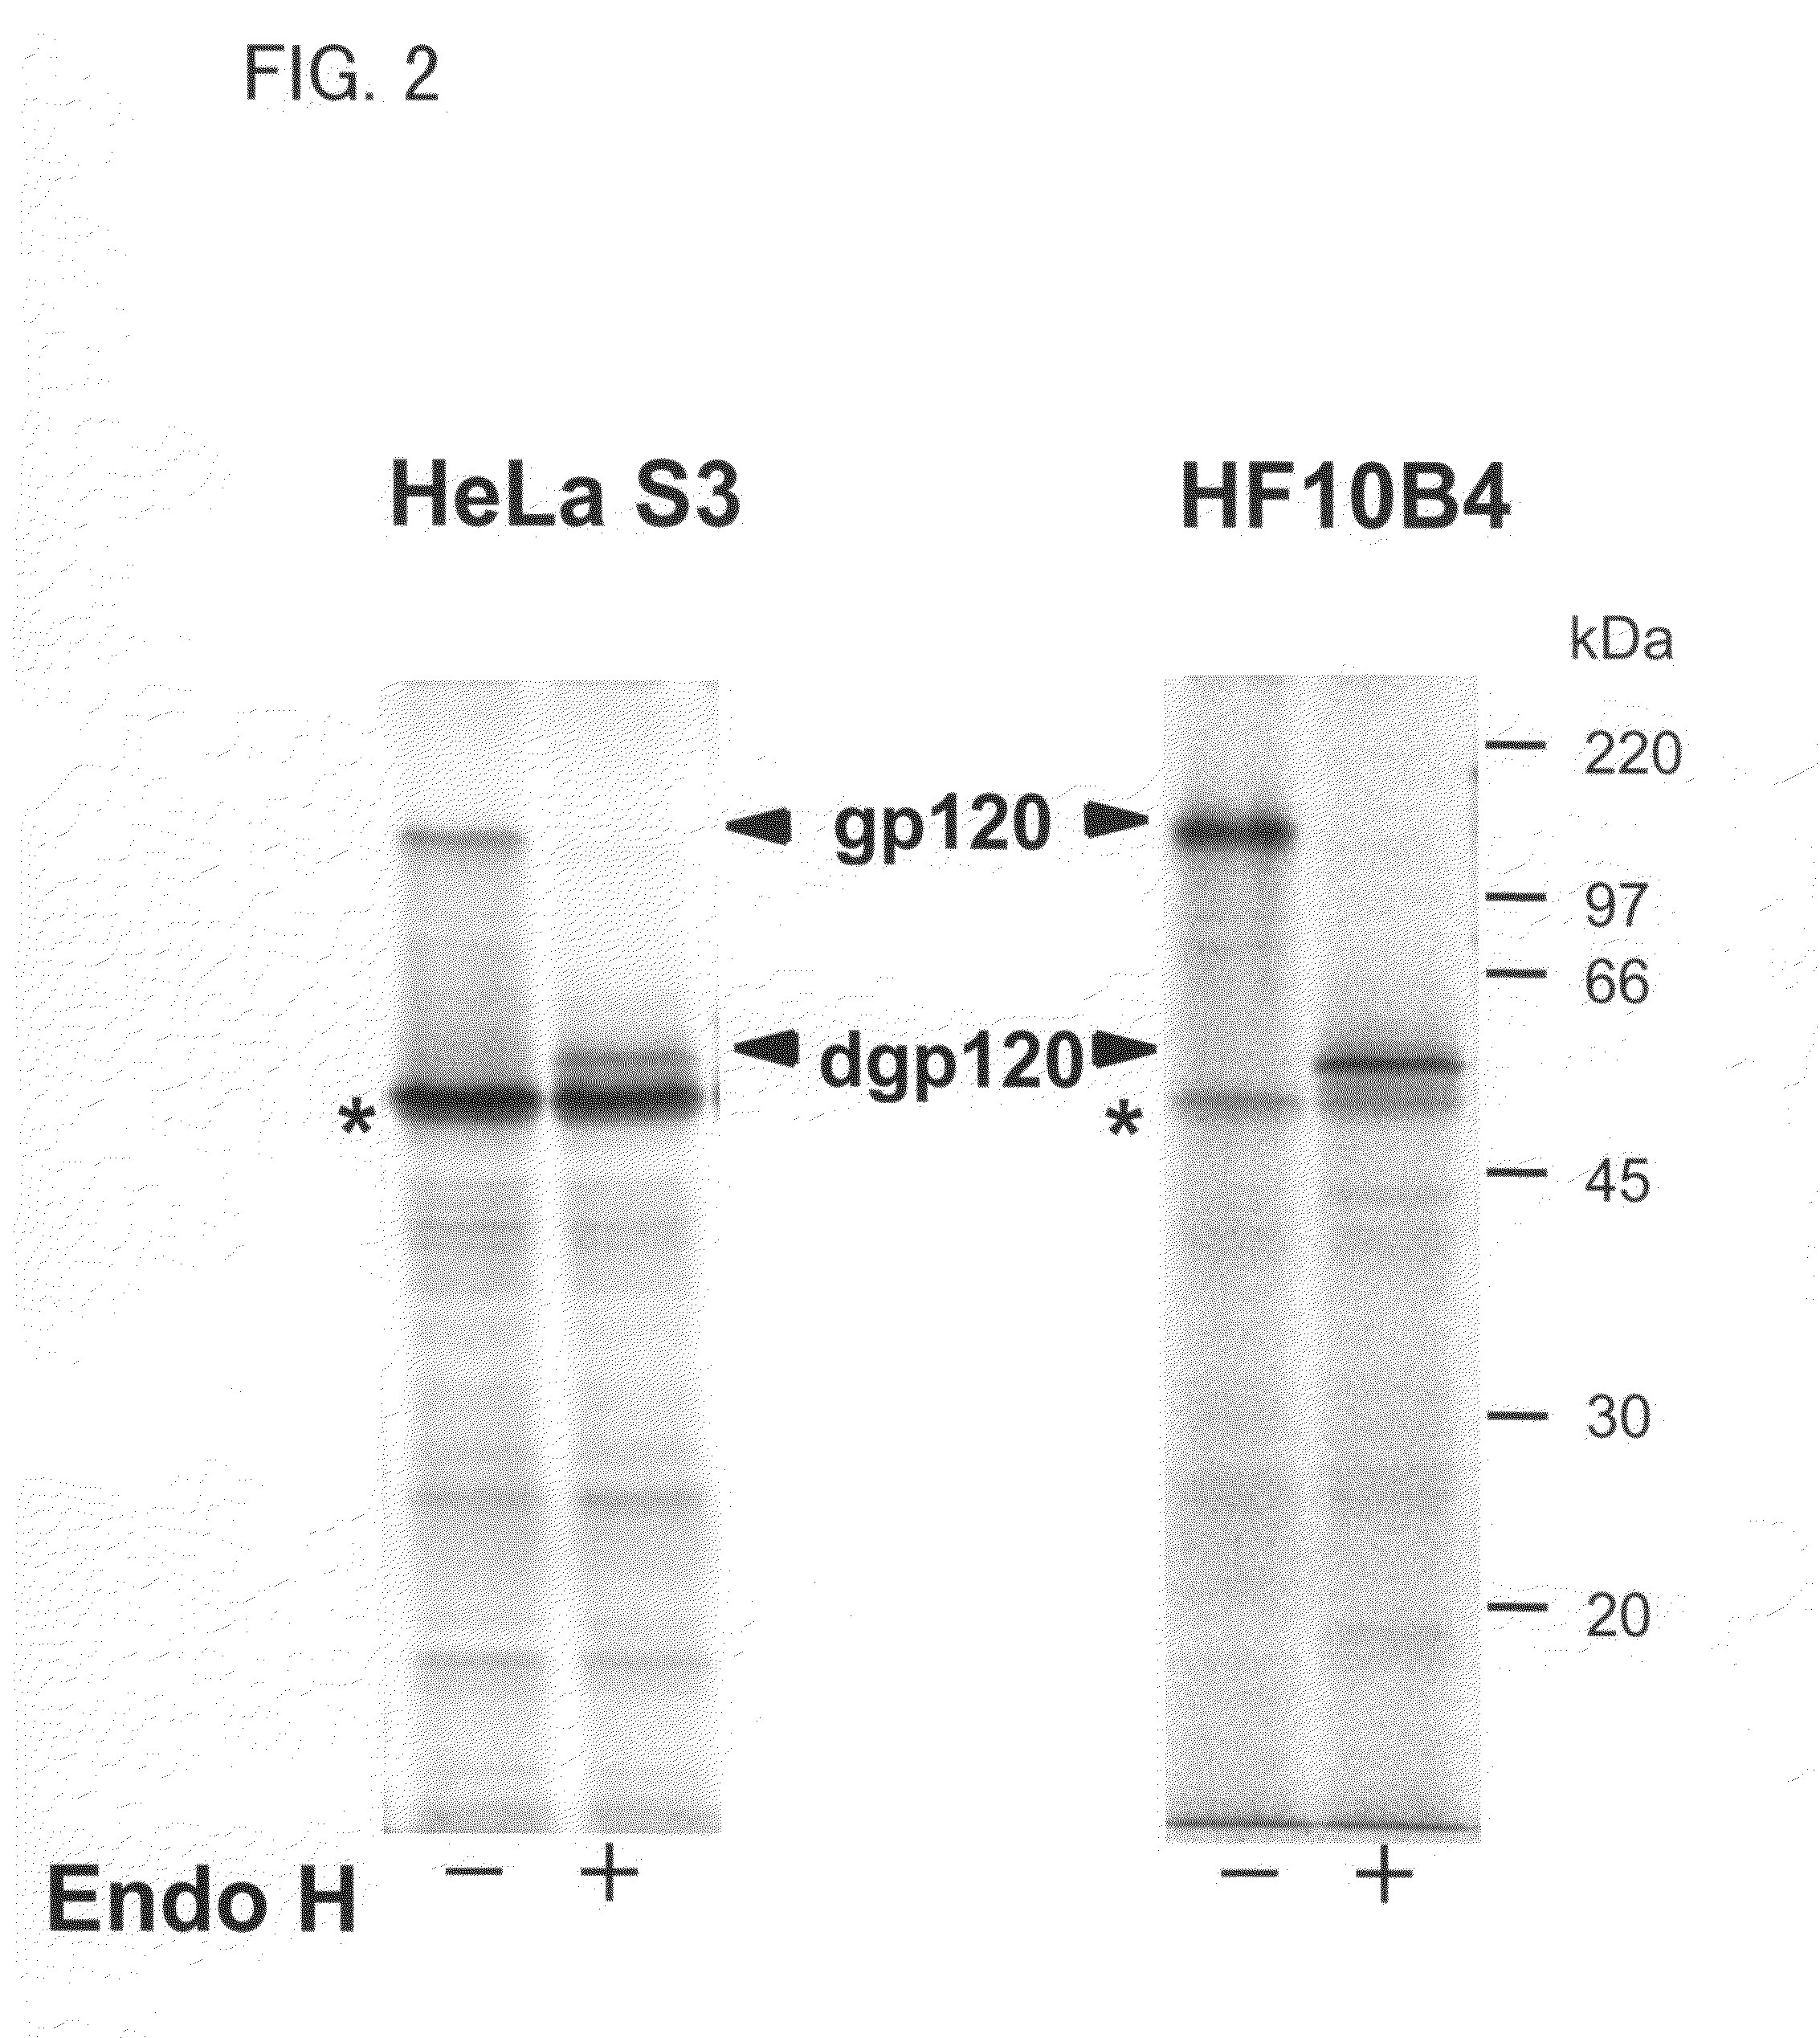 Cell-free protein synthesis system for synthesizing glycoprotein